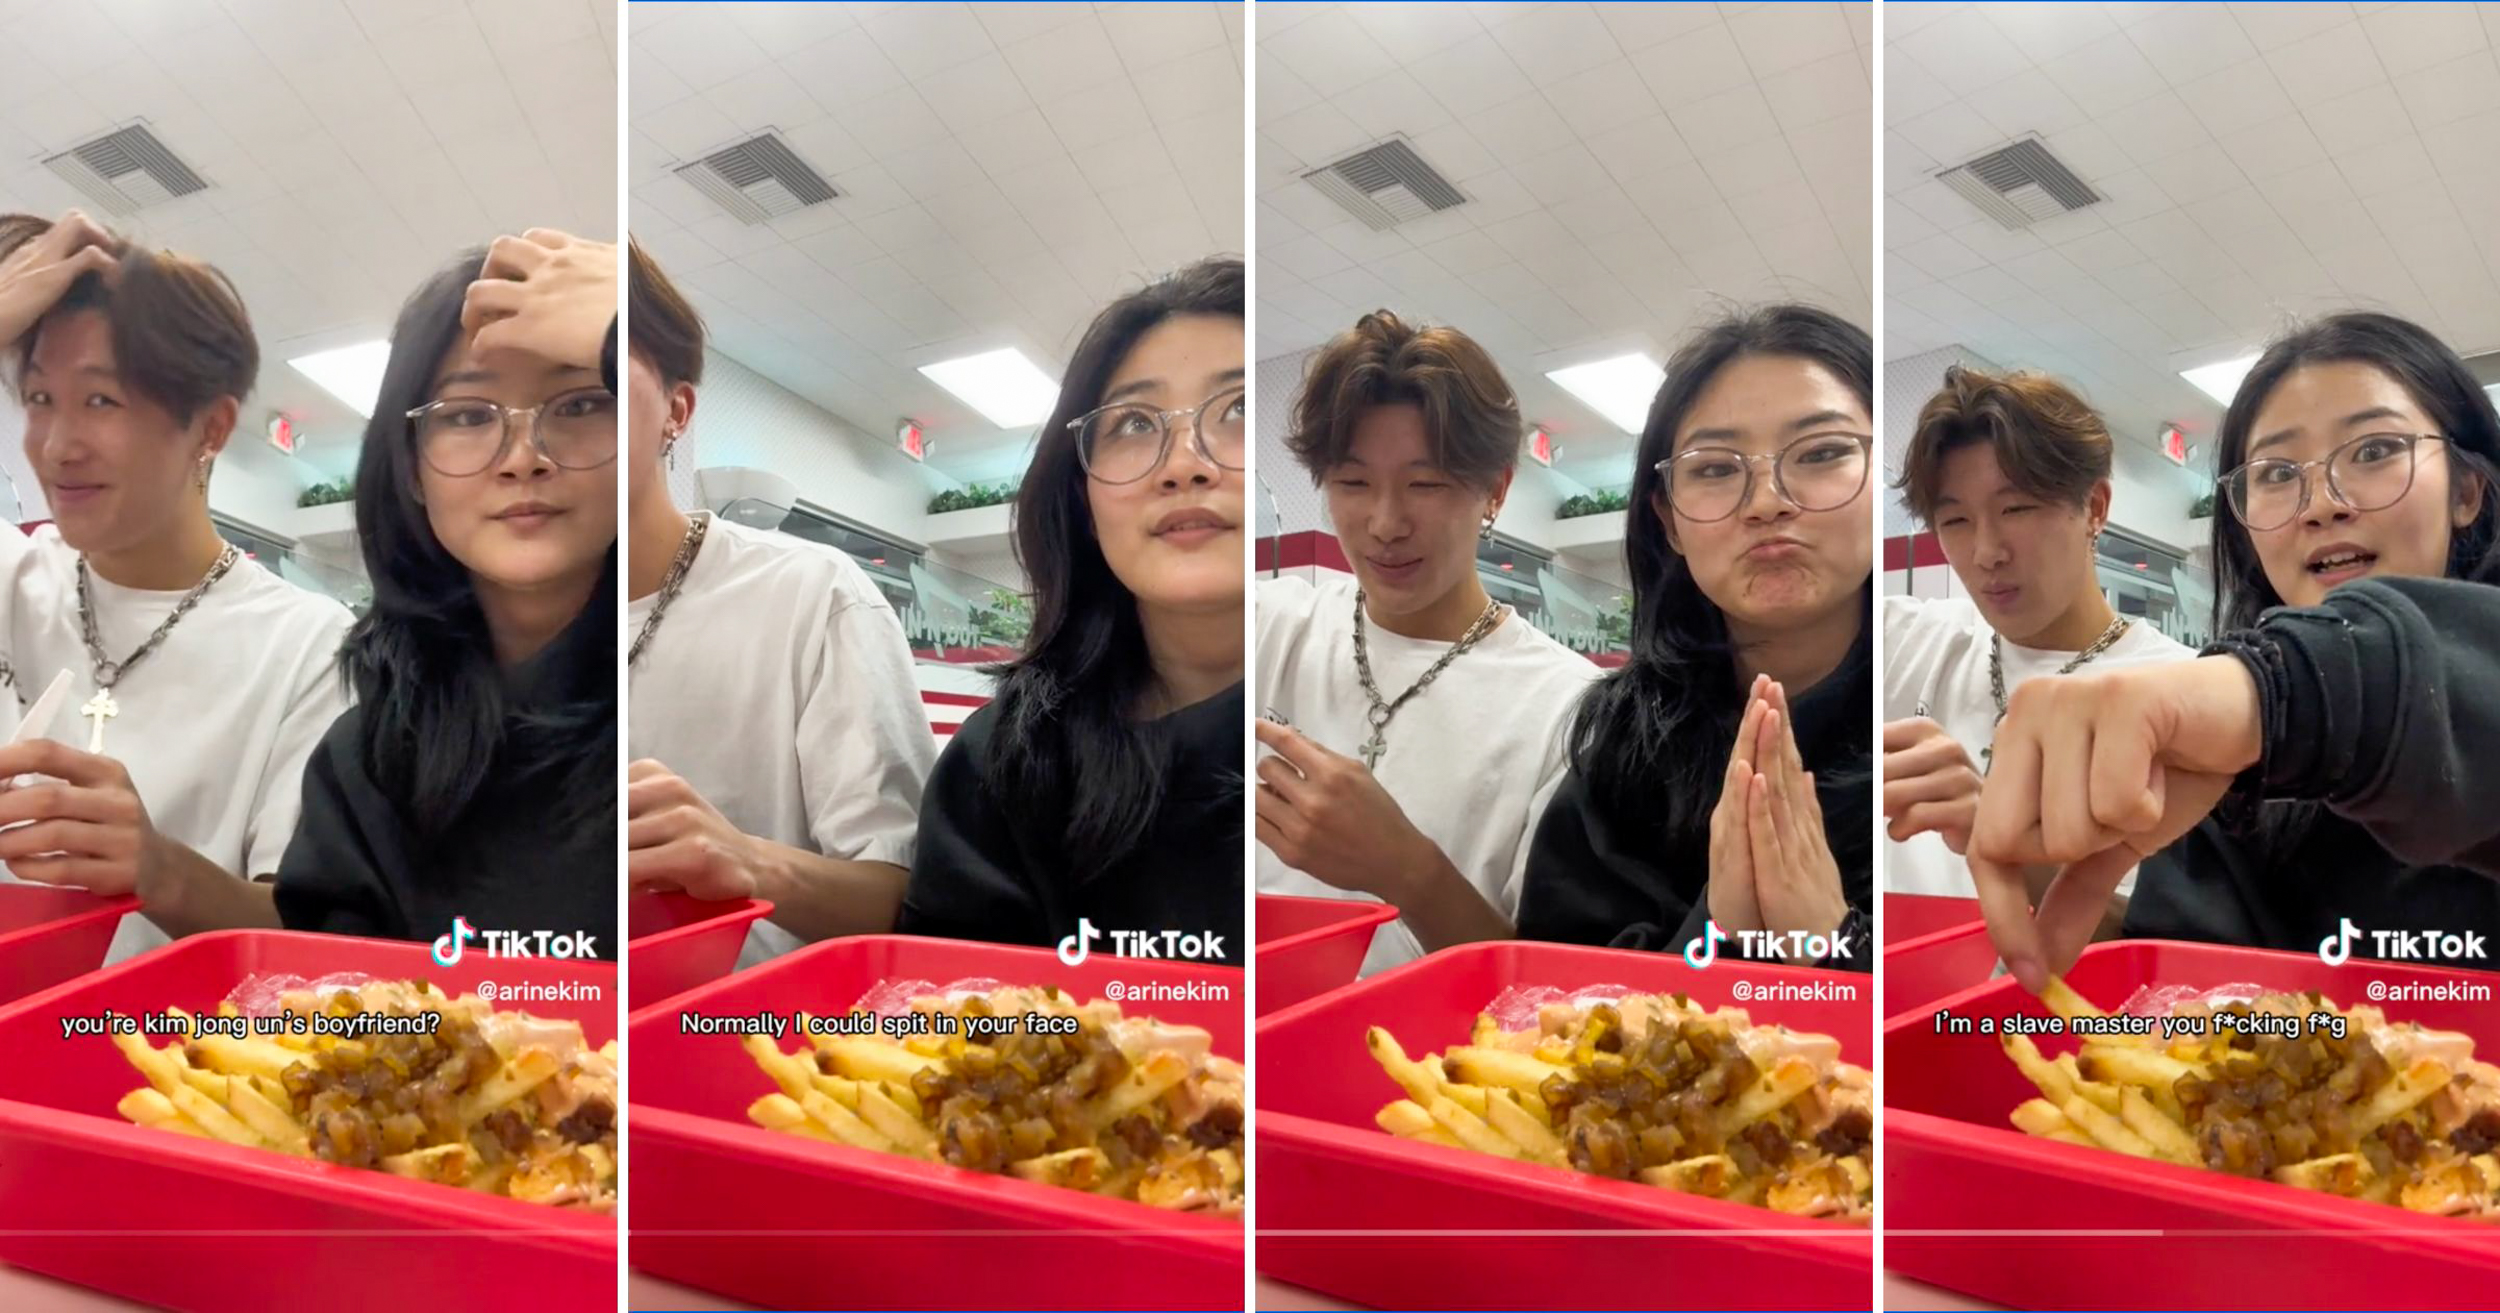 The racist incident in a viral TikTok ‘ruined’ In-N-Out for Bay Area college student